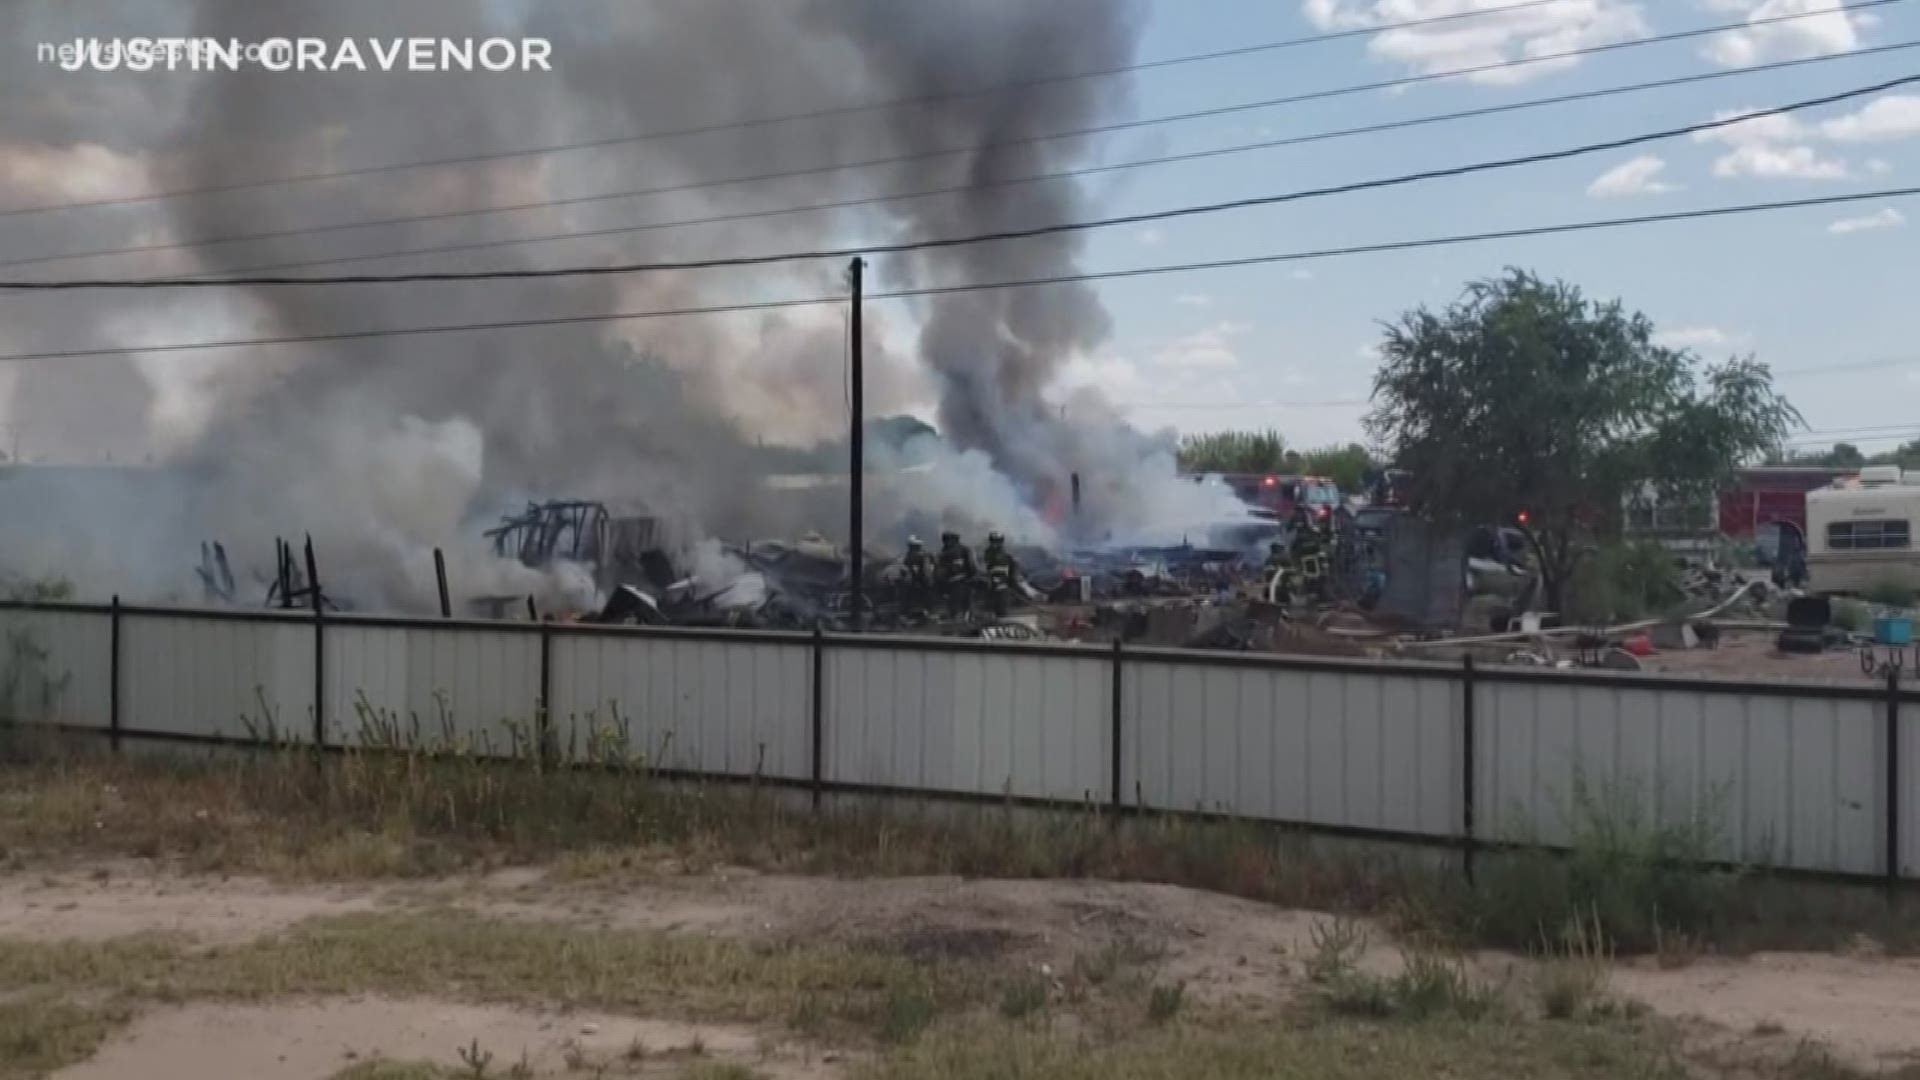 The fire involved multiple mobile homes and caused some propane tanks to explode.